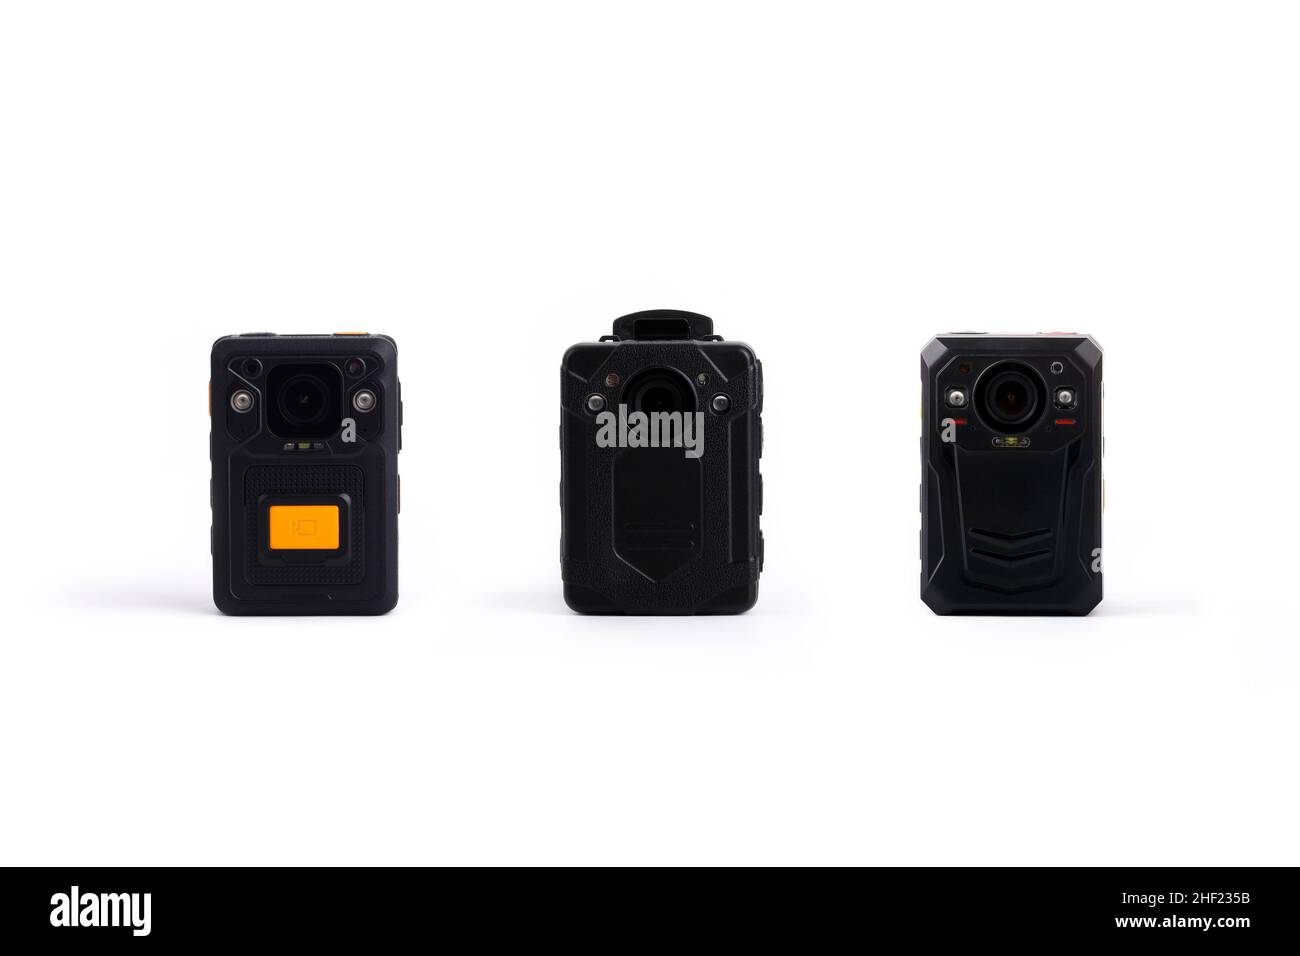 Three different kinds of Officer body cam. Personal Wearable Video Recorders, Portable DVR, camera isolated on white background. Closeup, front view. Stock Photo